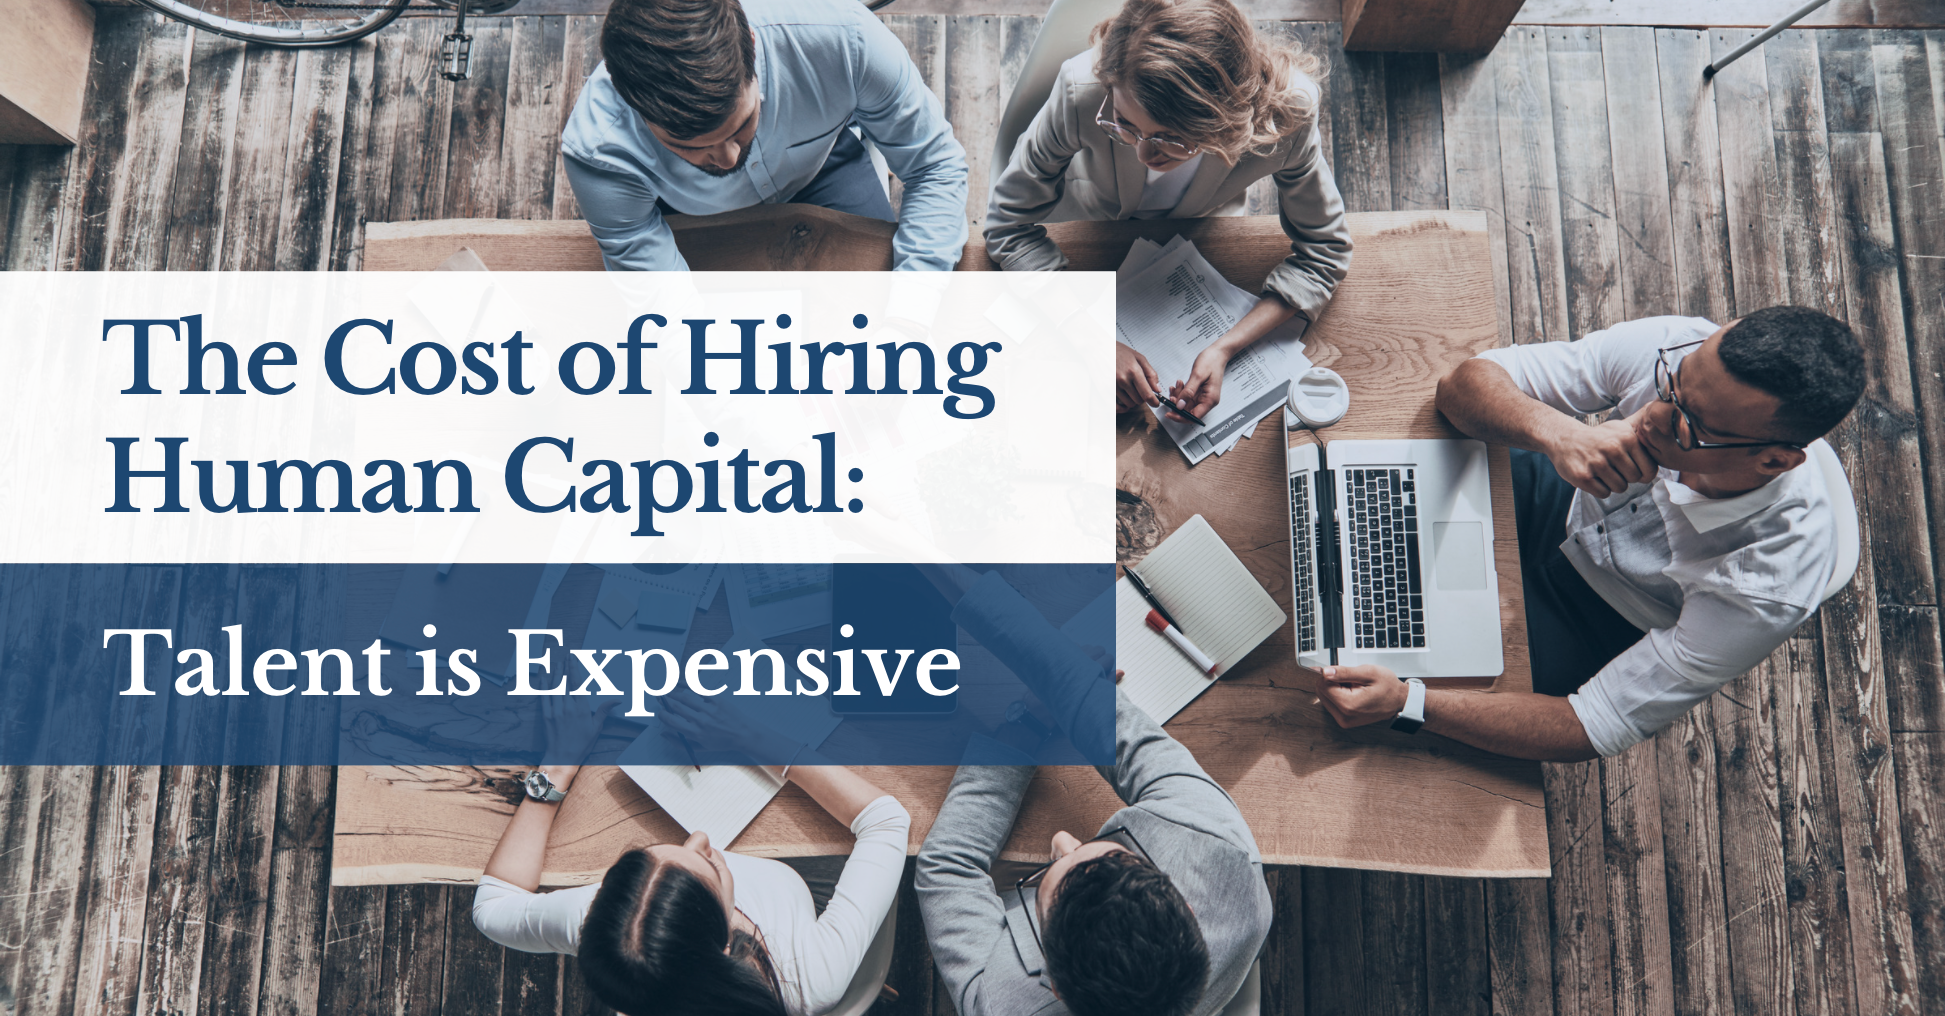 The Cost of Hiring Human Capital: Talent is Expensive